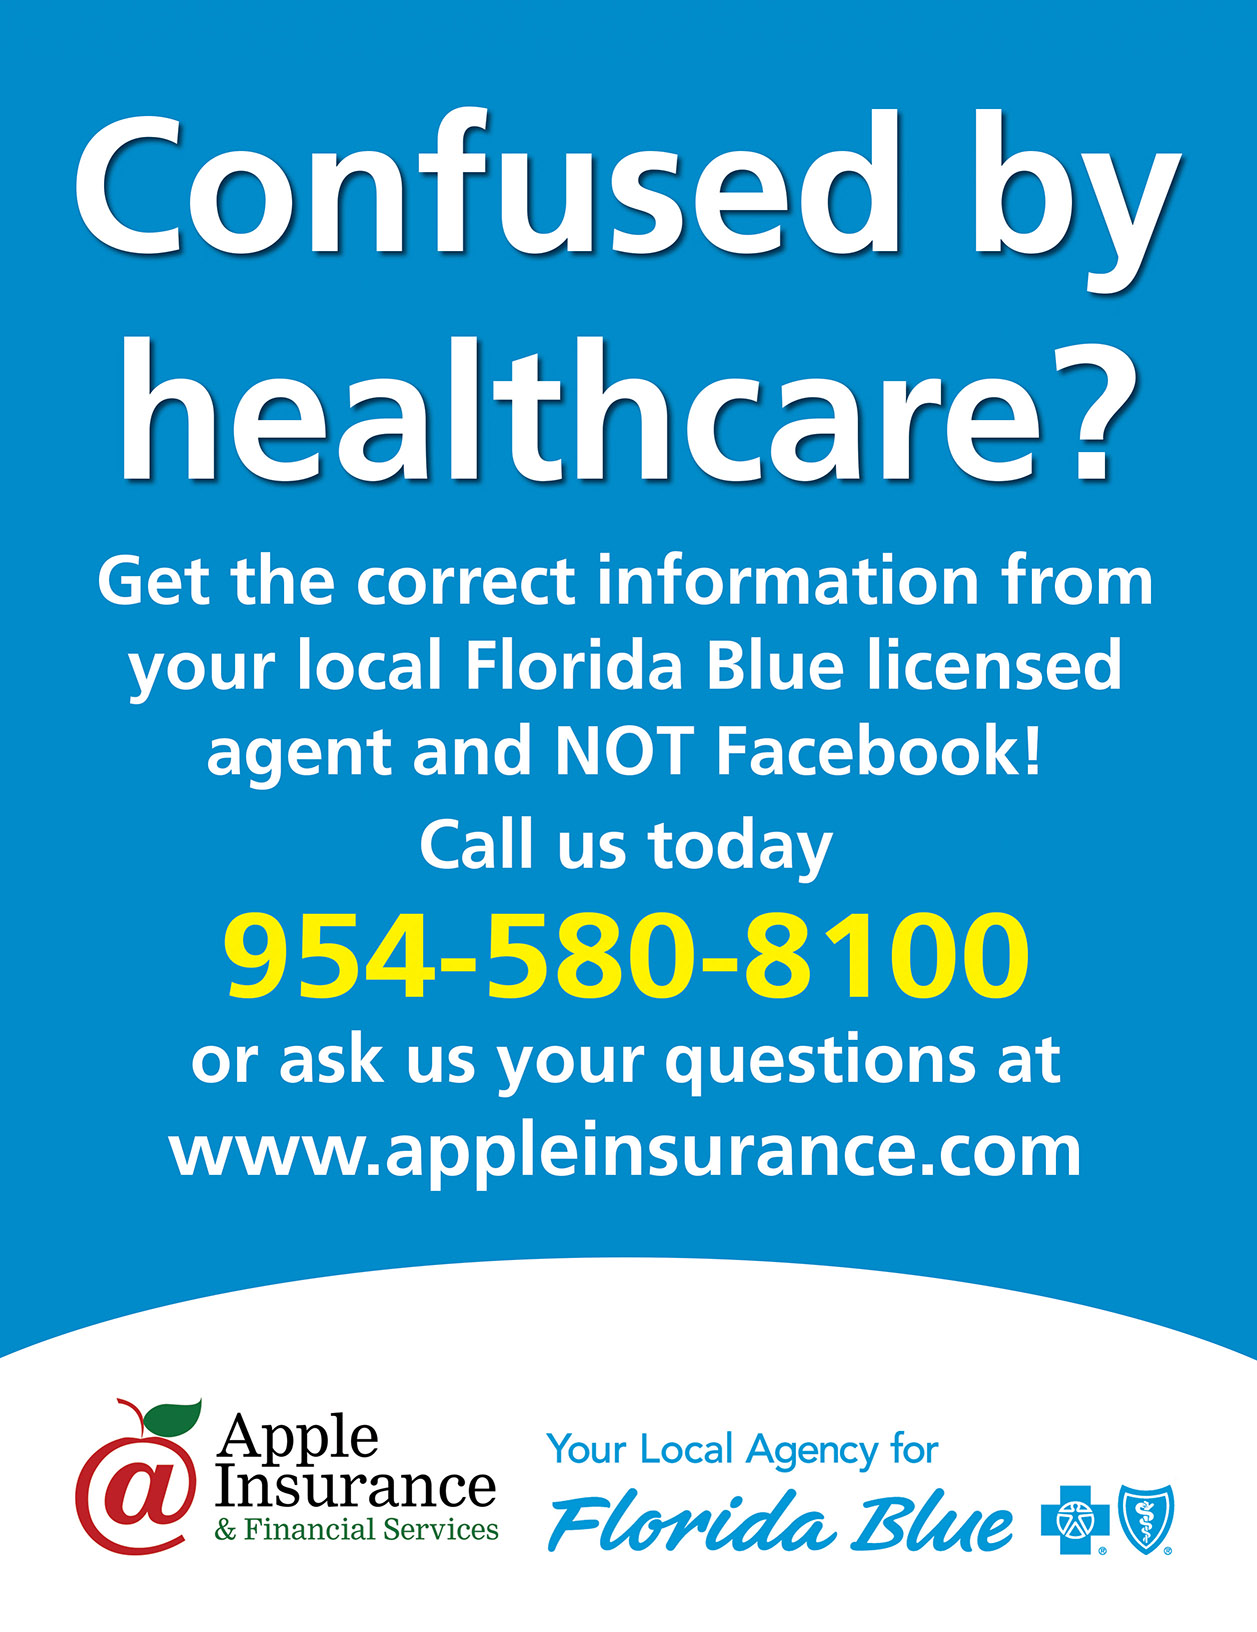 Family Healthcare Financial Services Fort Lauderdale Florida Apple Insurance 